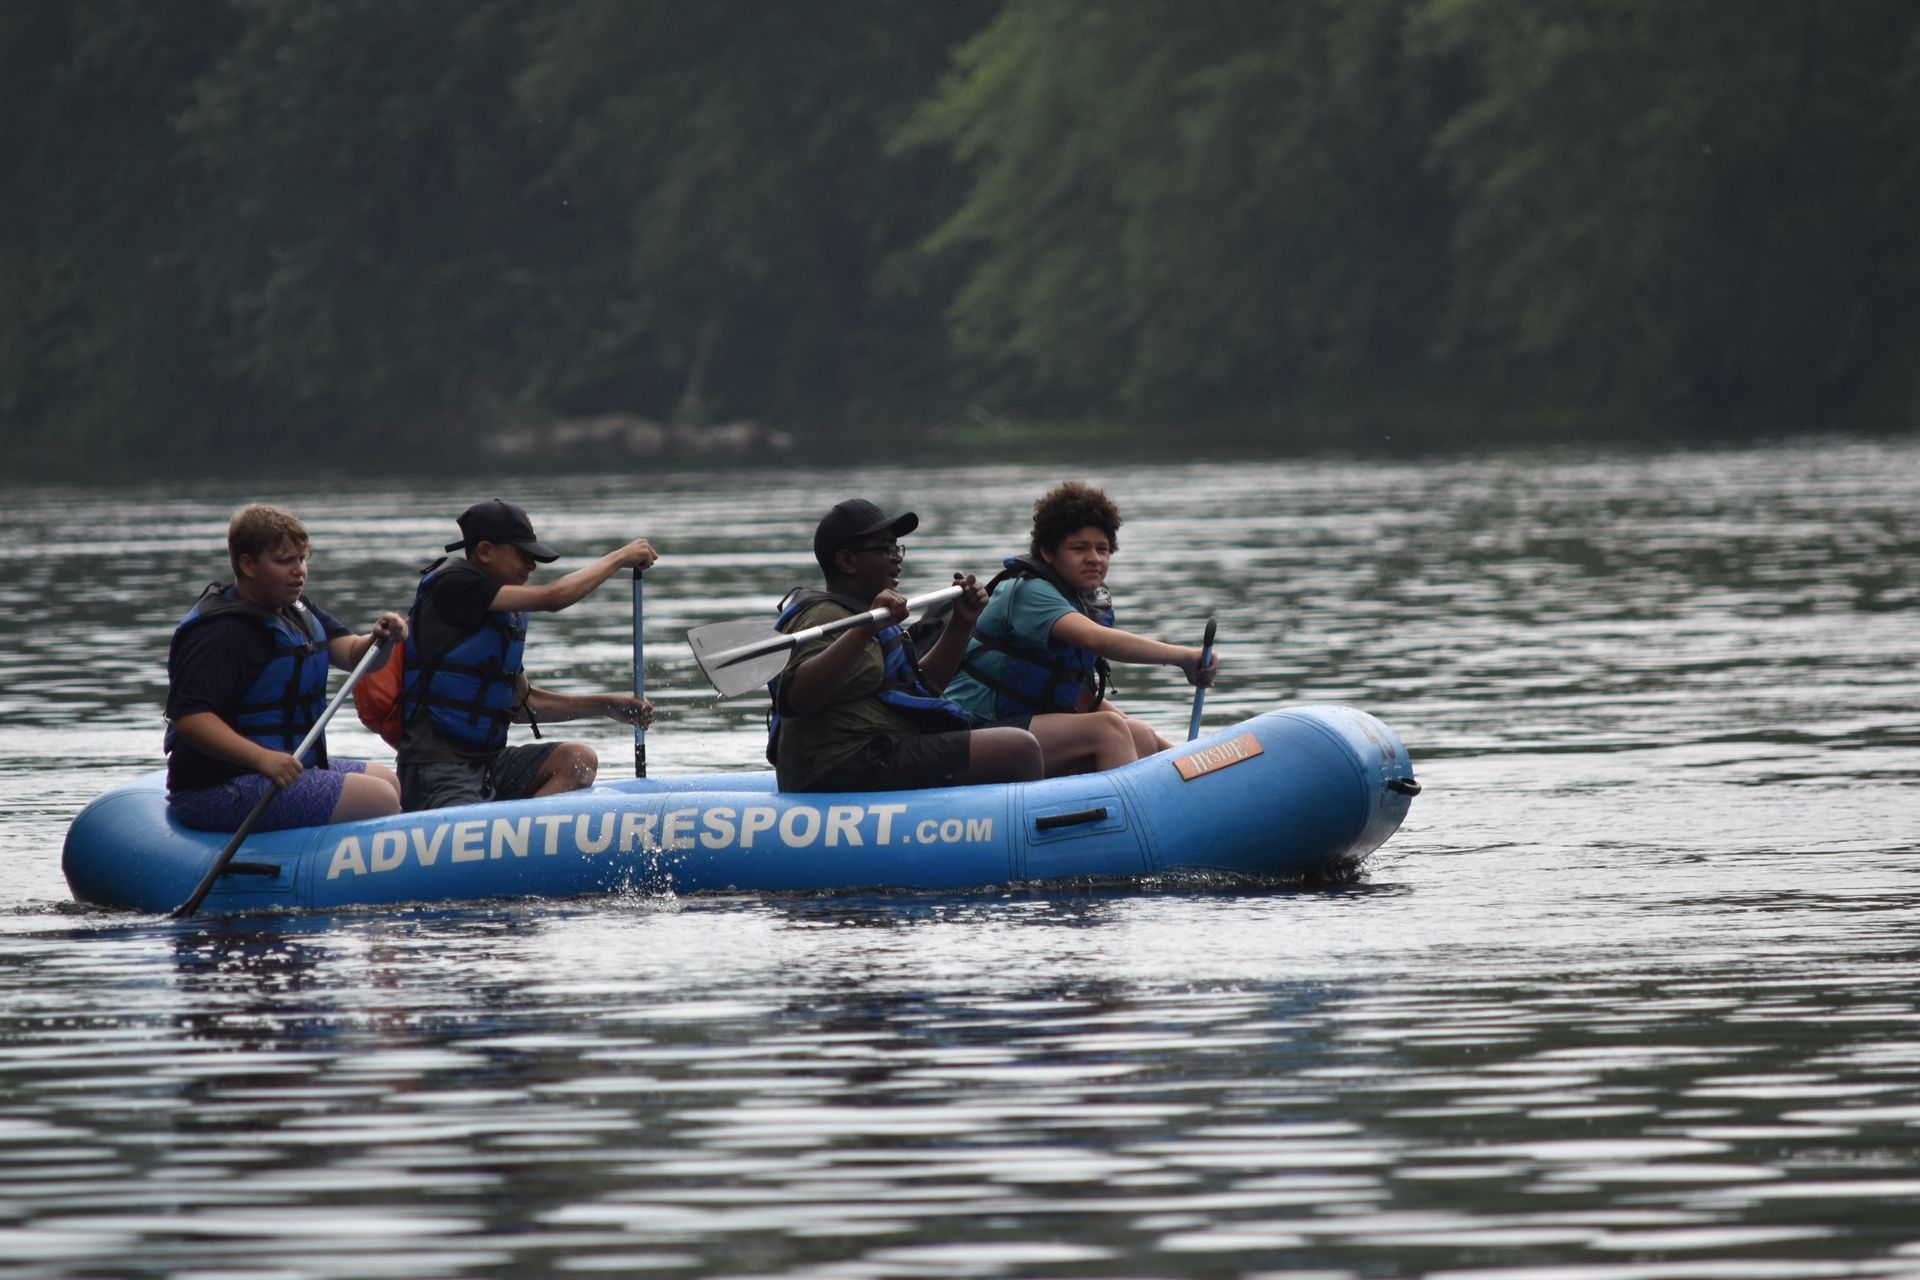 A group of people are rowing a raft on a lake with adventure sports